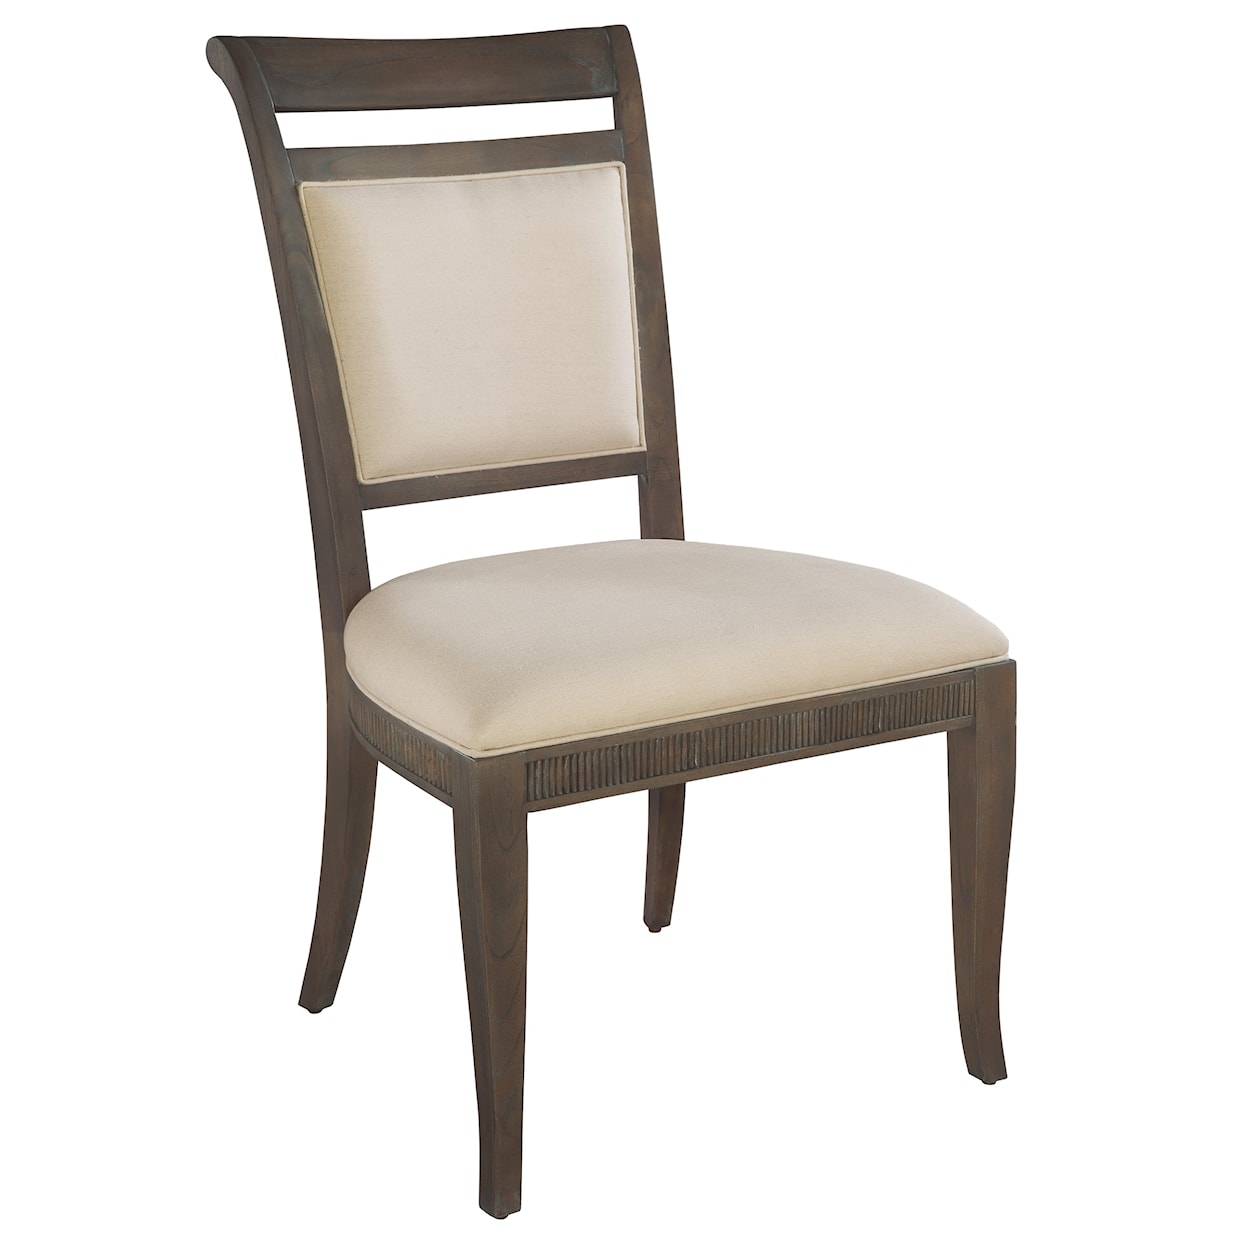 Hekman Urban Retreat Upholstered Dining Side Chair